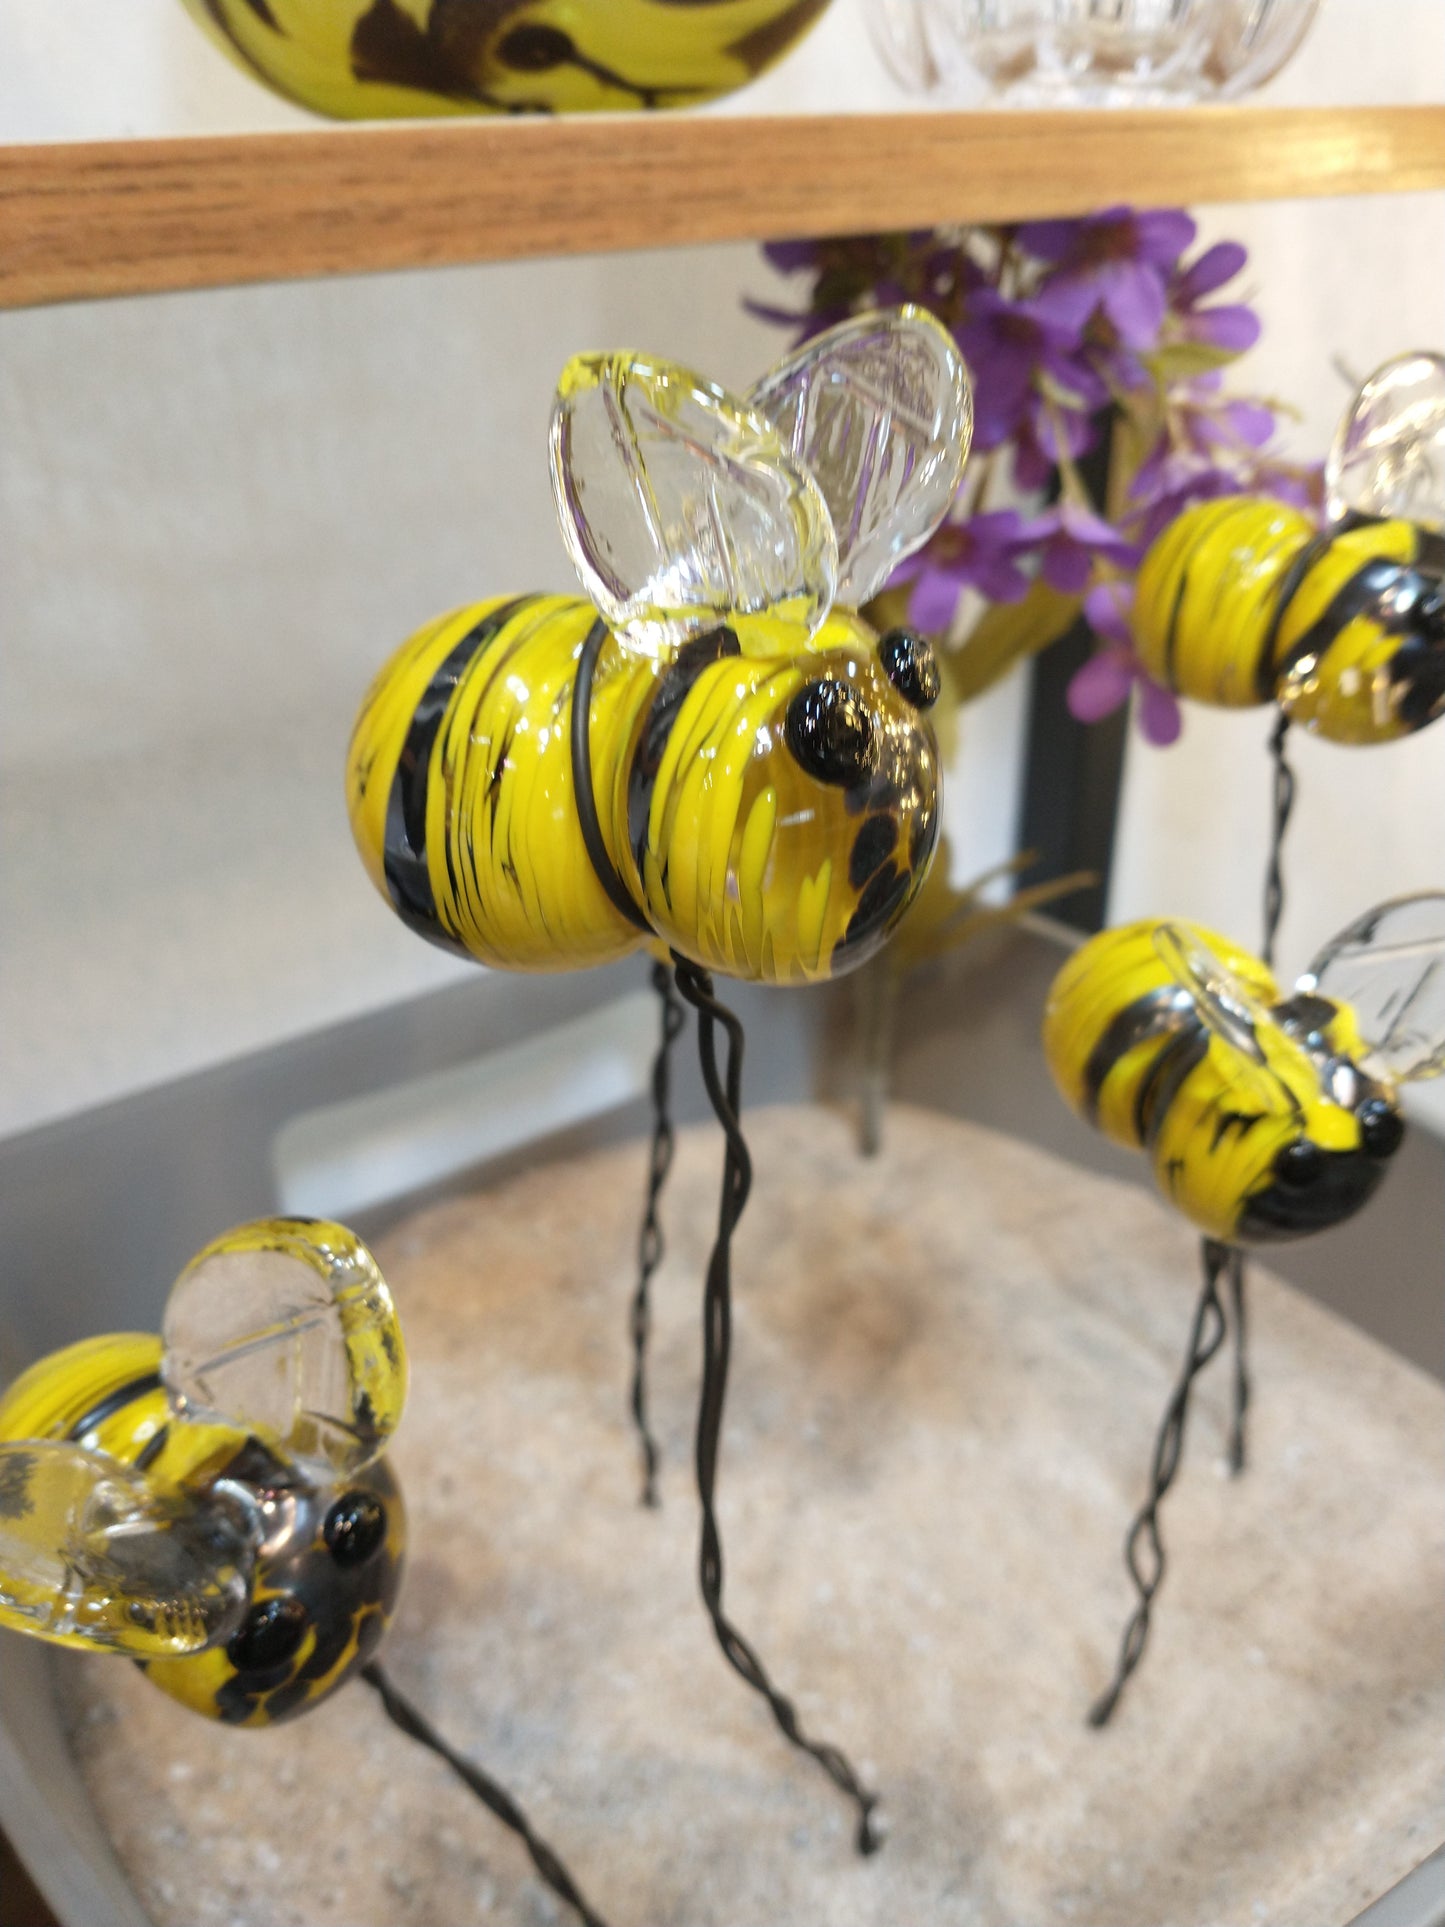 Glass Bee SINGLE Mini Planter Bees bumble bees small glass bees honey bees hand blown glass figurines glass planter decoration garden plants (Copy)